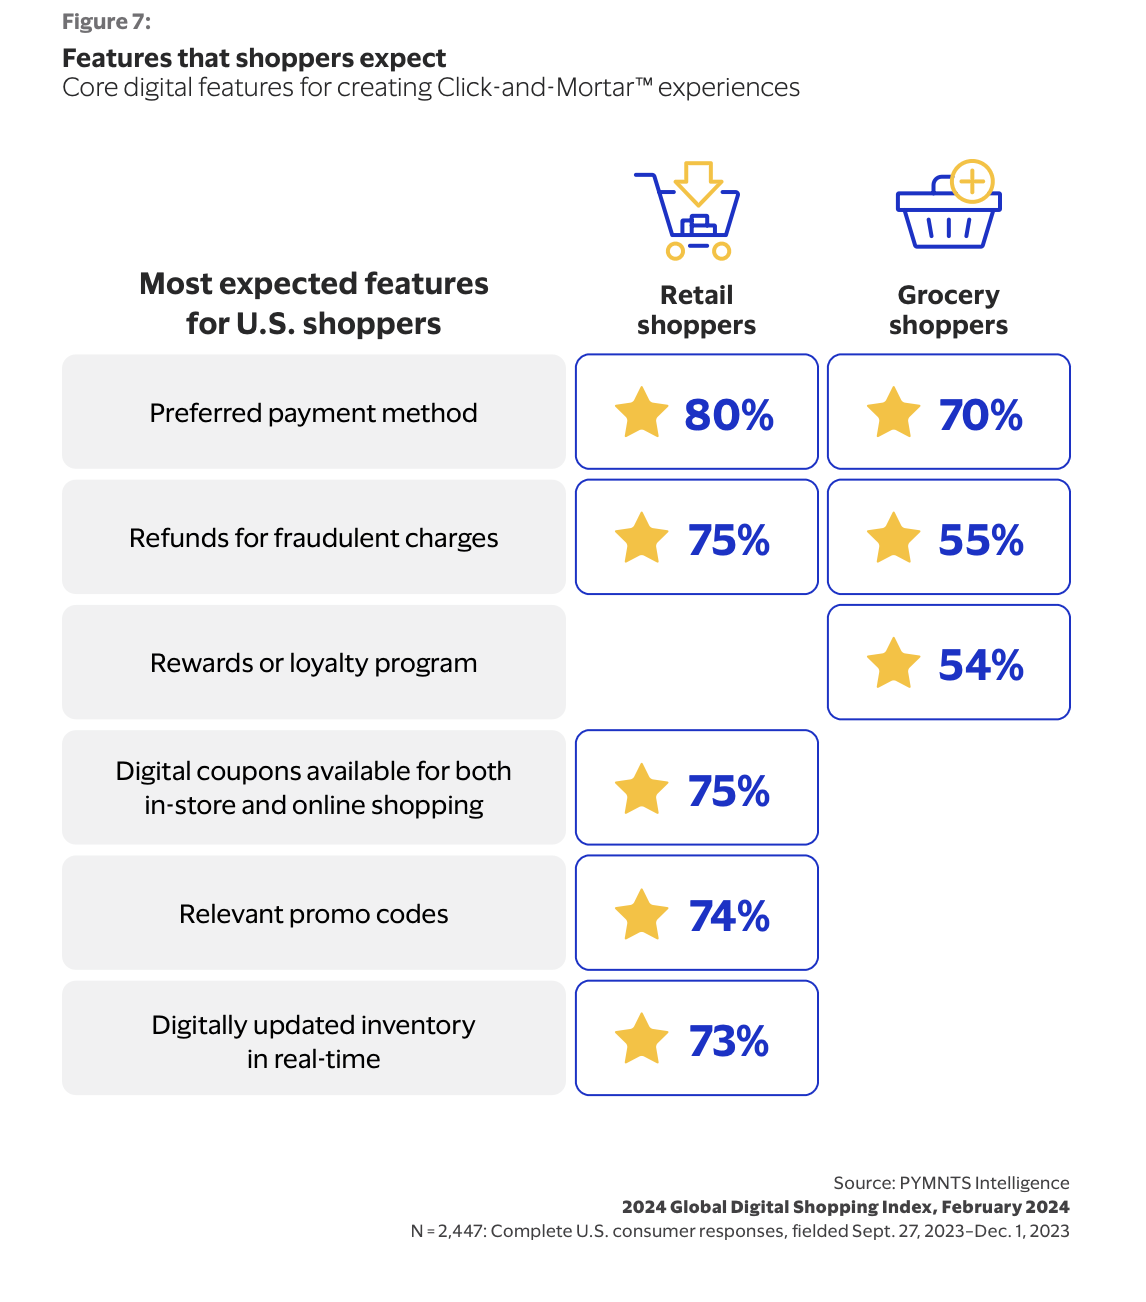 graphic, features shoppers expect